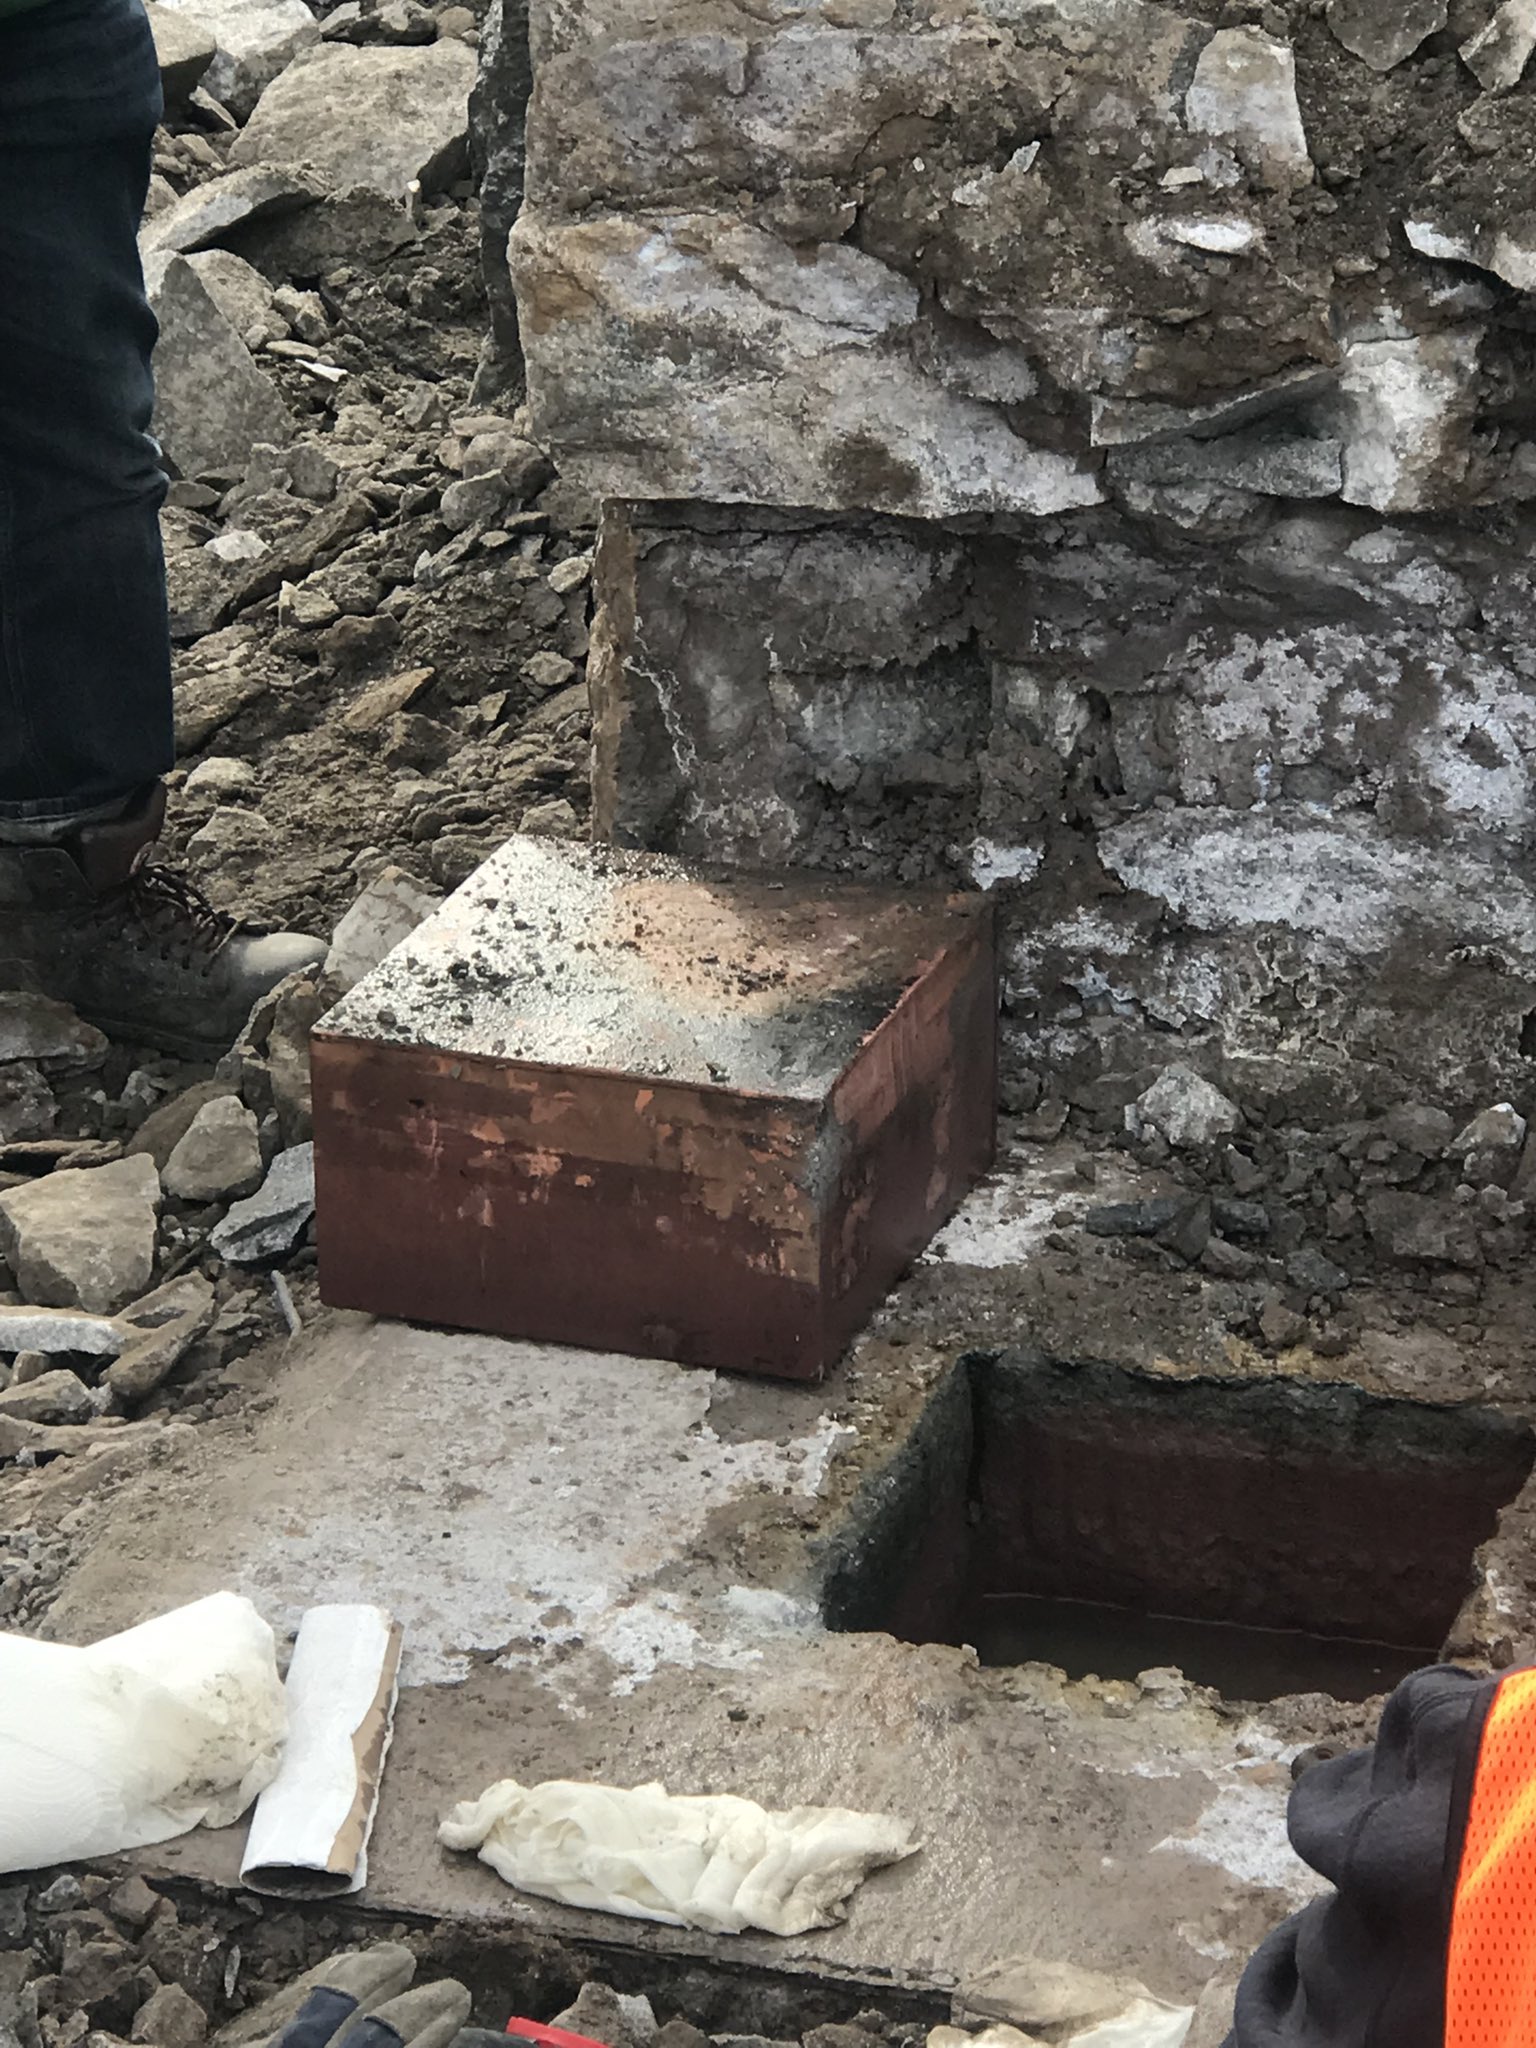 130-year-old time capsule found in base of US statue